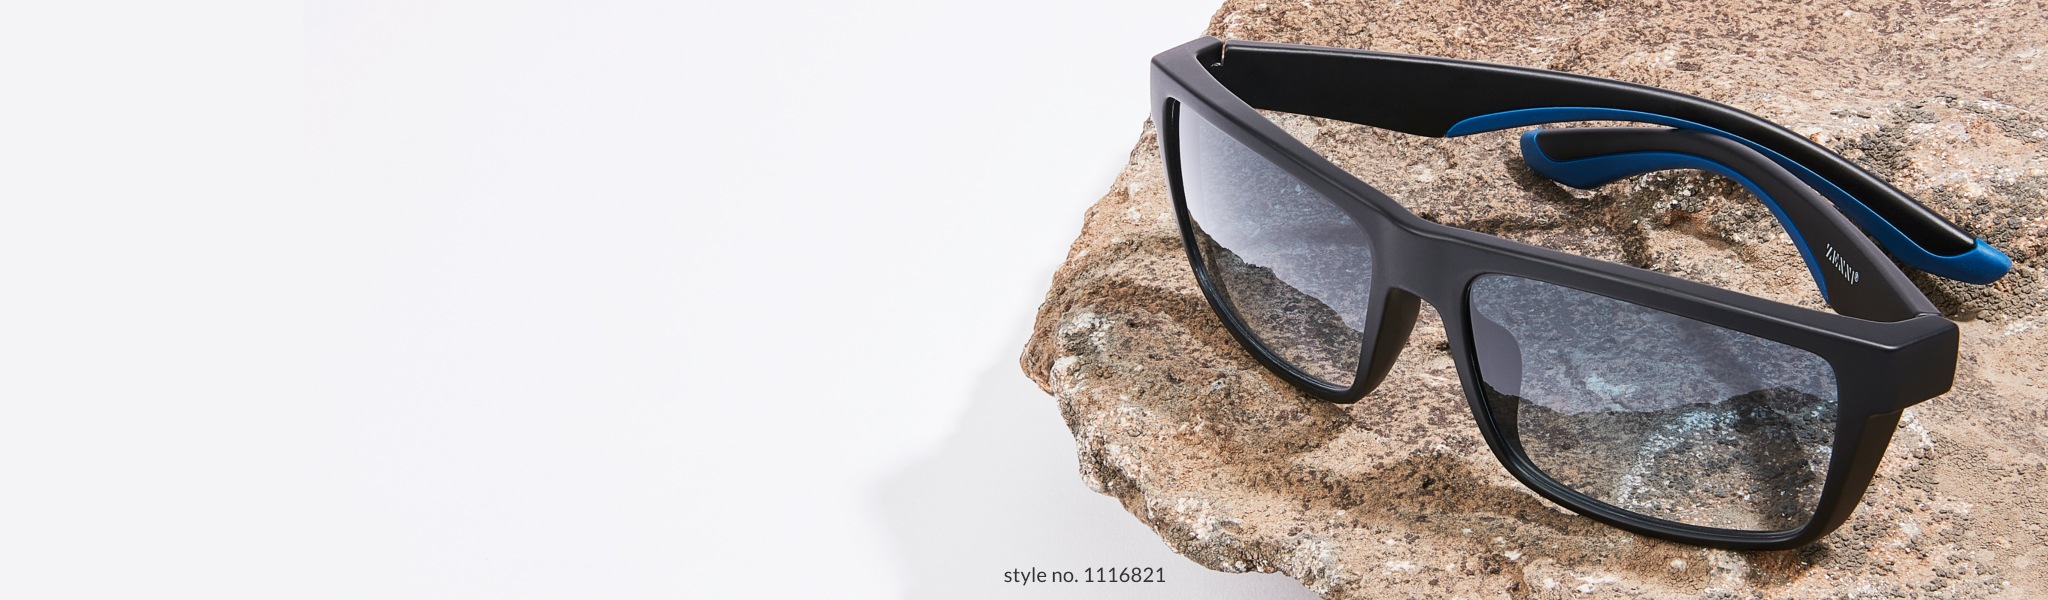 Image of Zenni premium rectangle sunglasses #1116821 placed on a sheet of rock, against a white background.